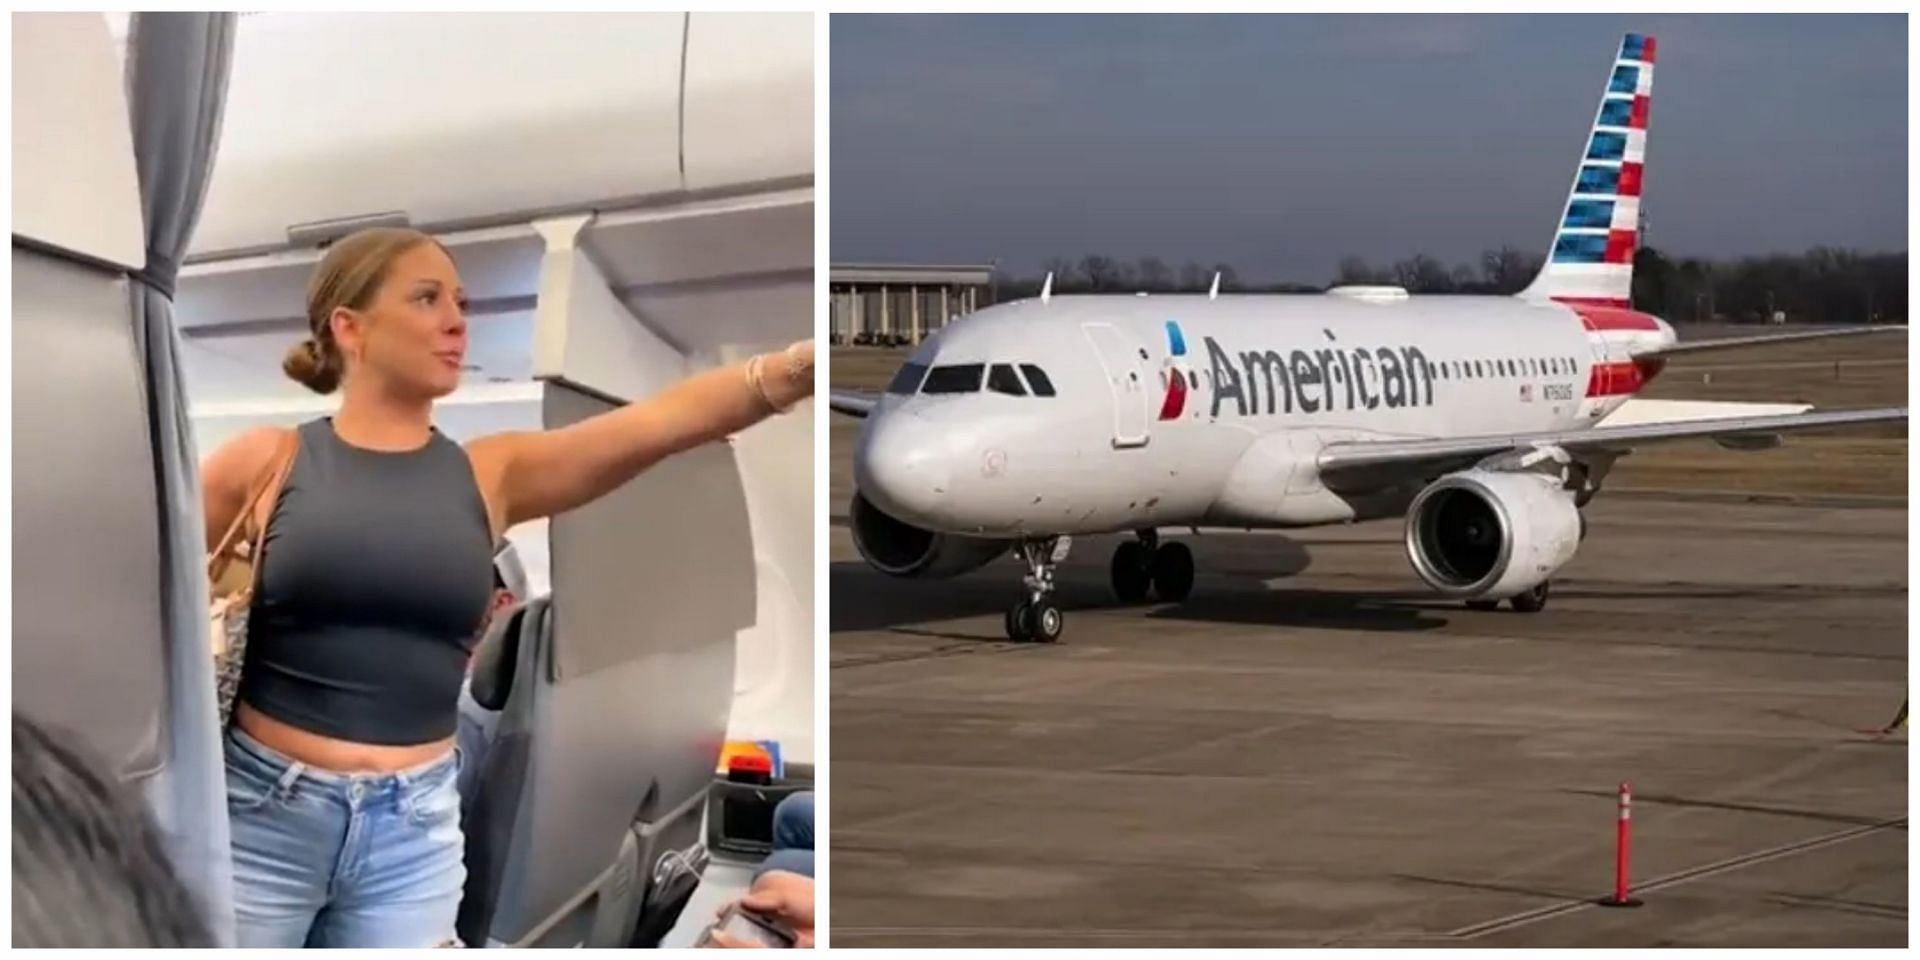 Social media users questioned the legitimacy of the rumour claiming that woman seen in the video is missing. (Image via Twitter &amp; American Airlines)